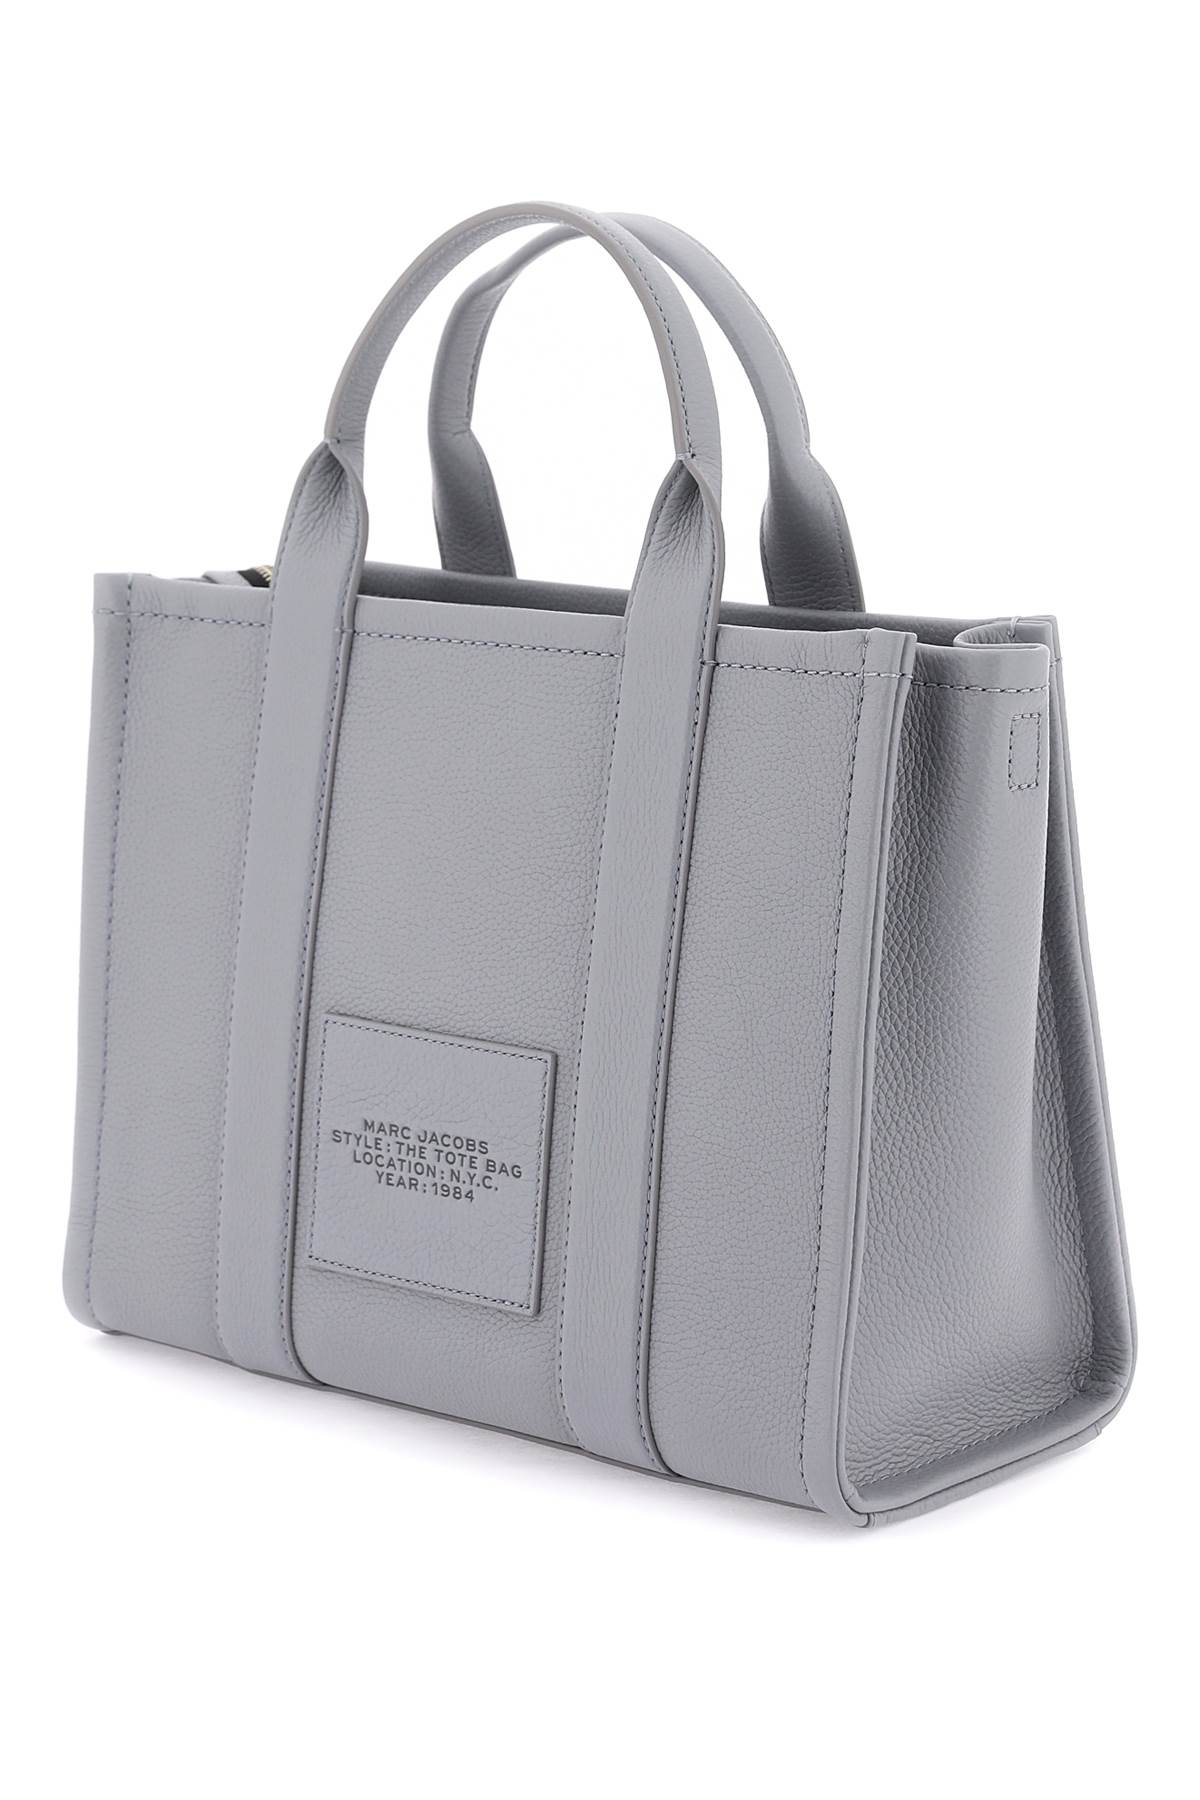 Shop Marc Jacobs The Leather Medium Tote Bag In Wolf Grey (grey)